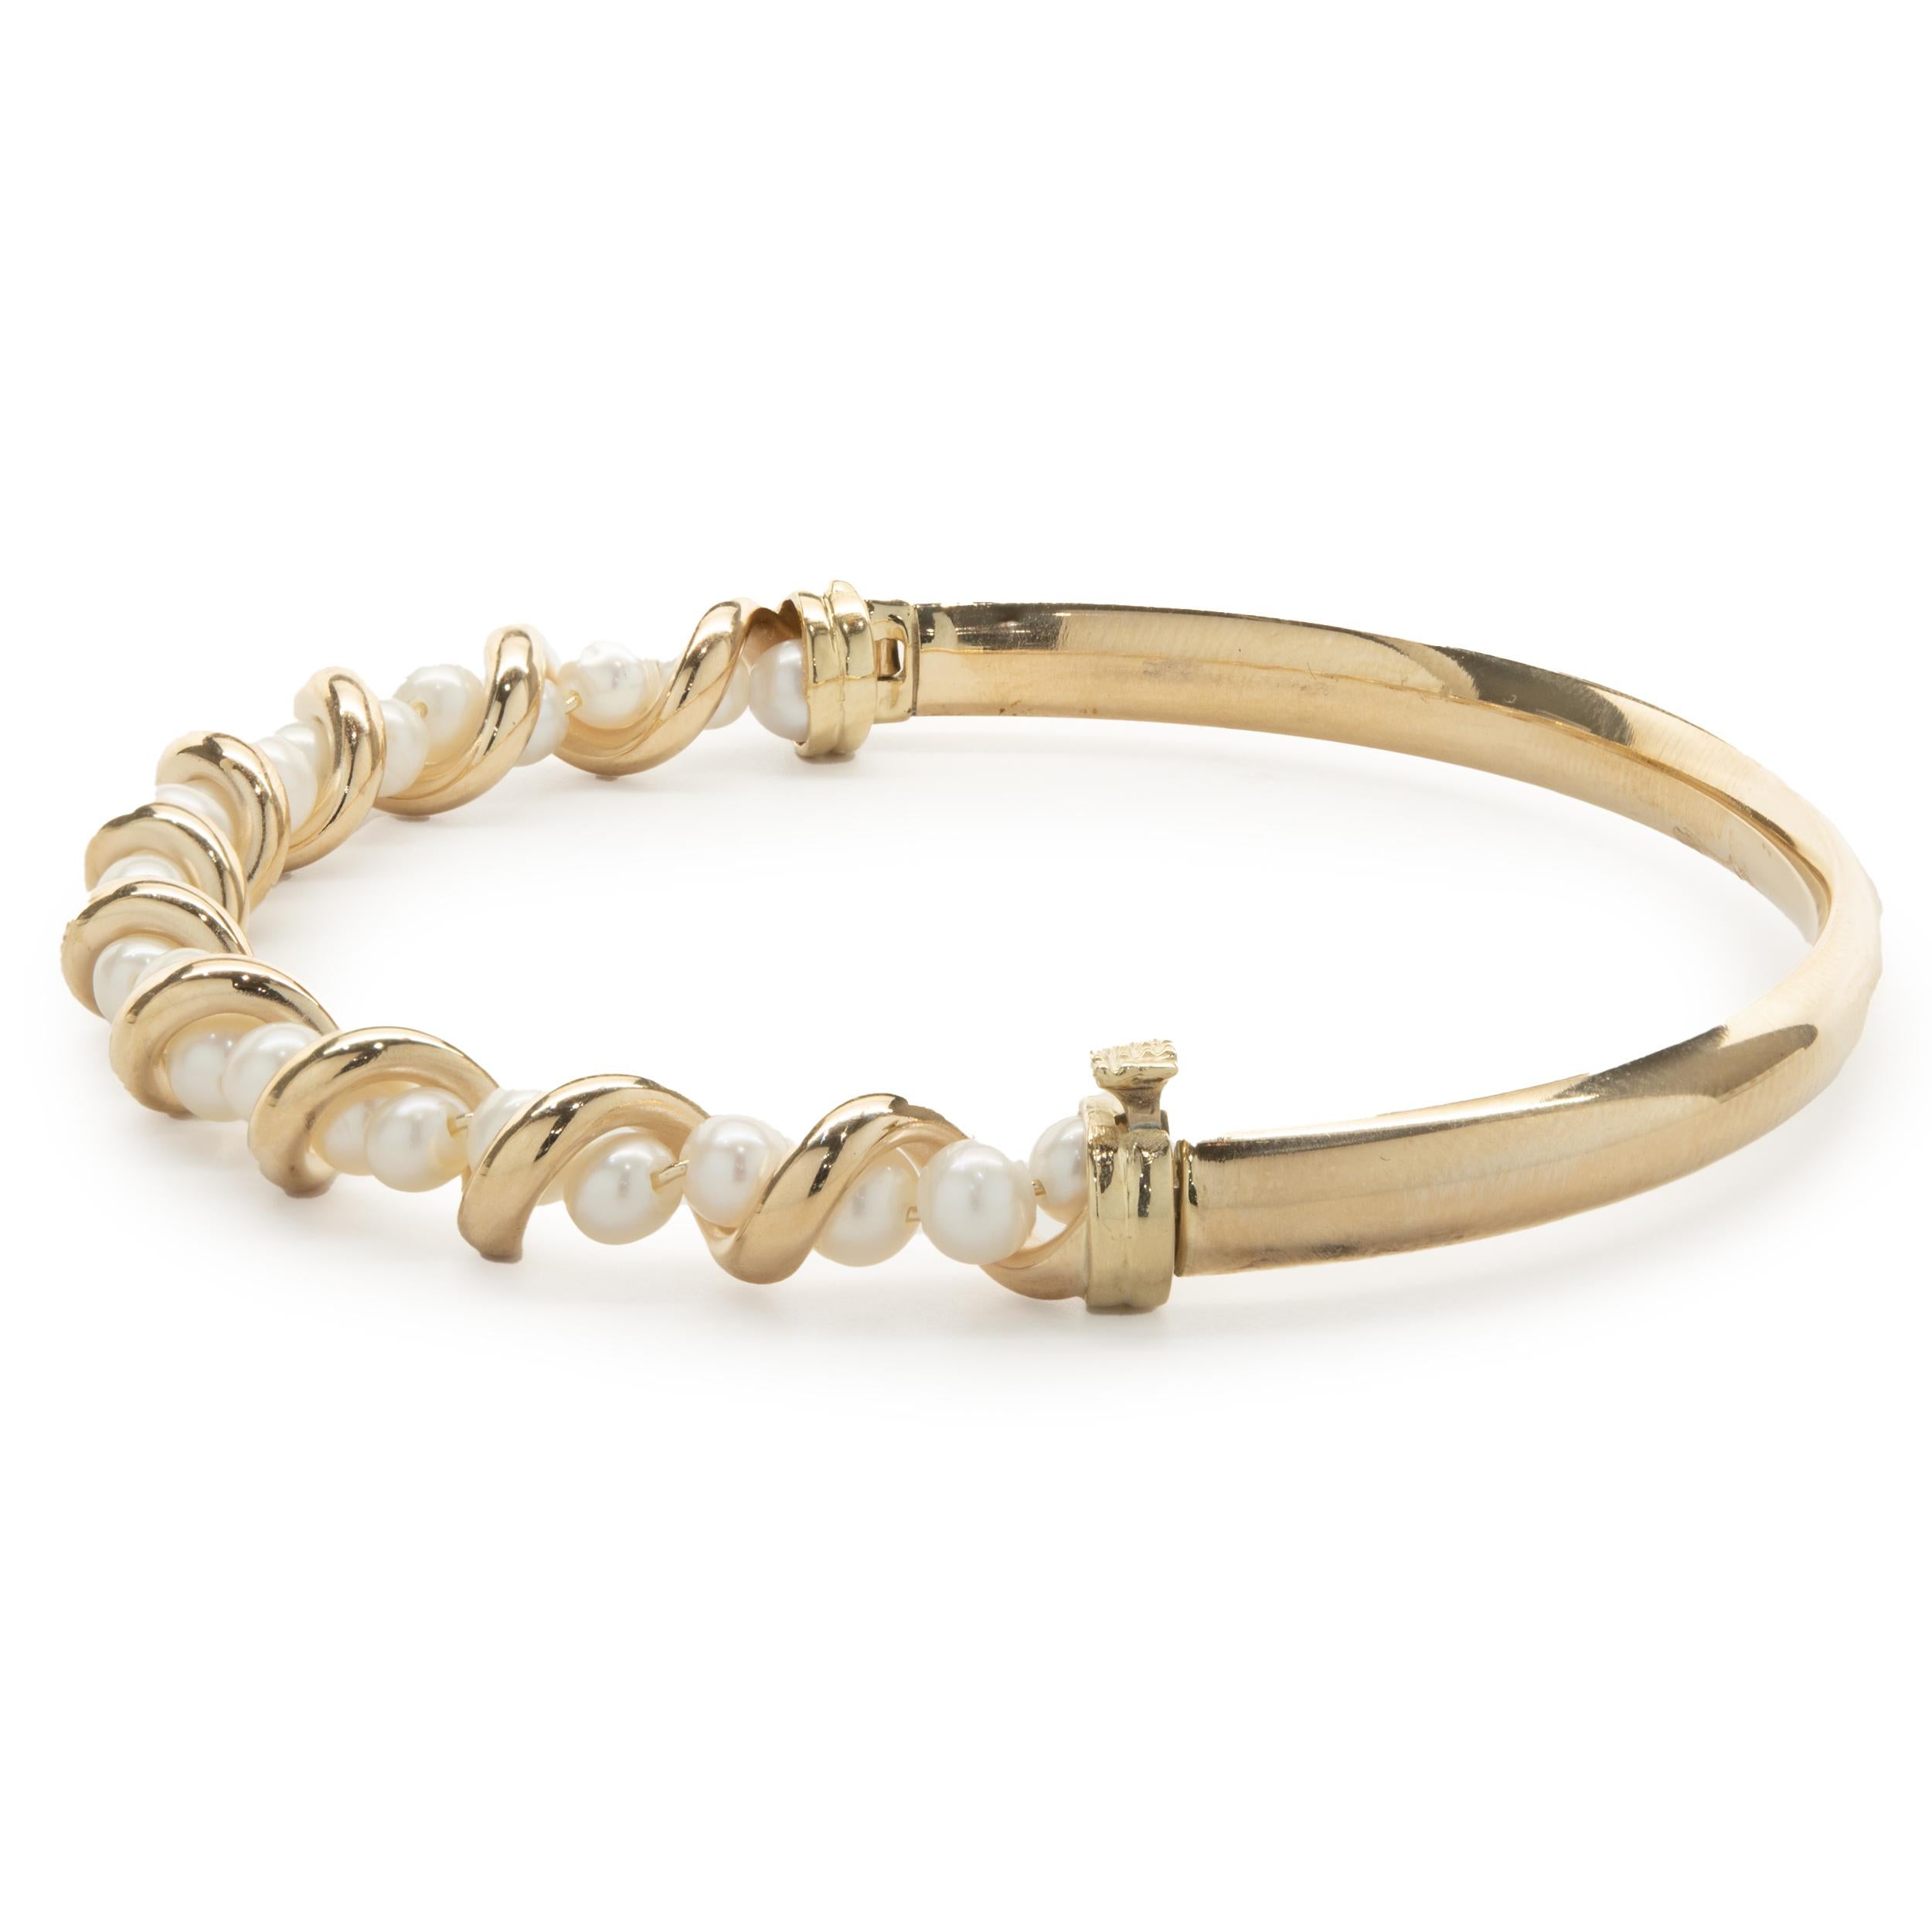 Designer: custom
Material: 14K yellow gold
Weight: 7.21 grams
Pearl: 3.25mm
Dimensions: bracelet will fit up to an 6.5-inch wrist